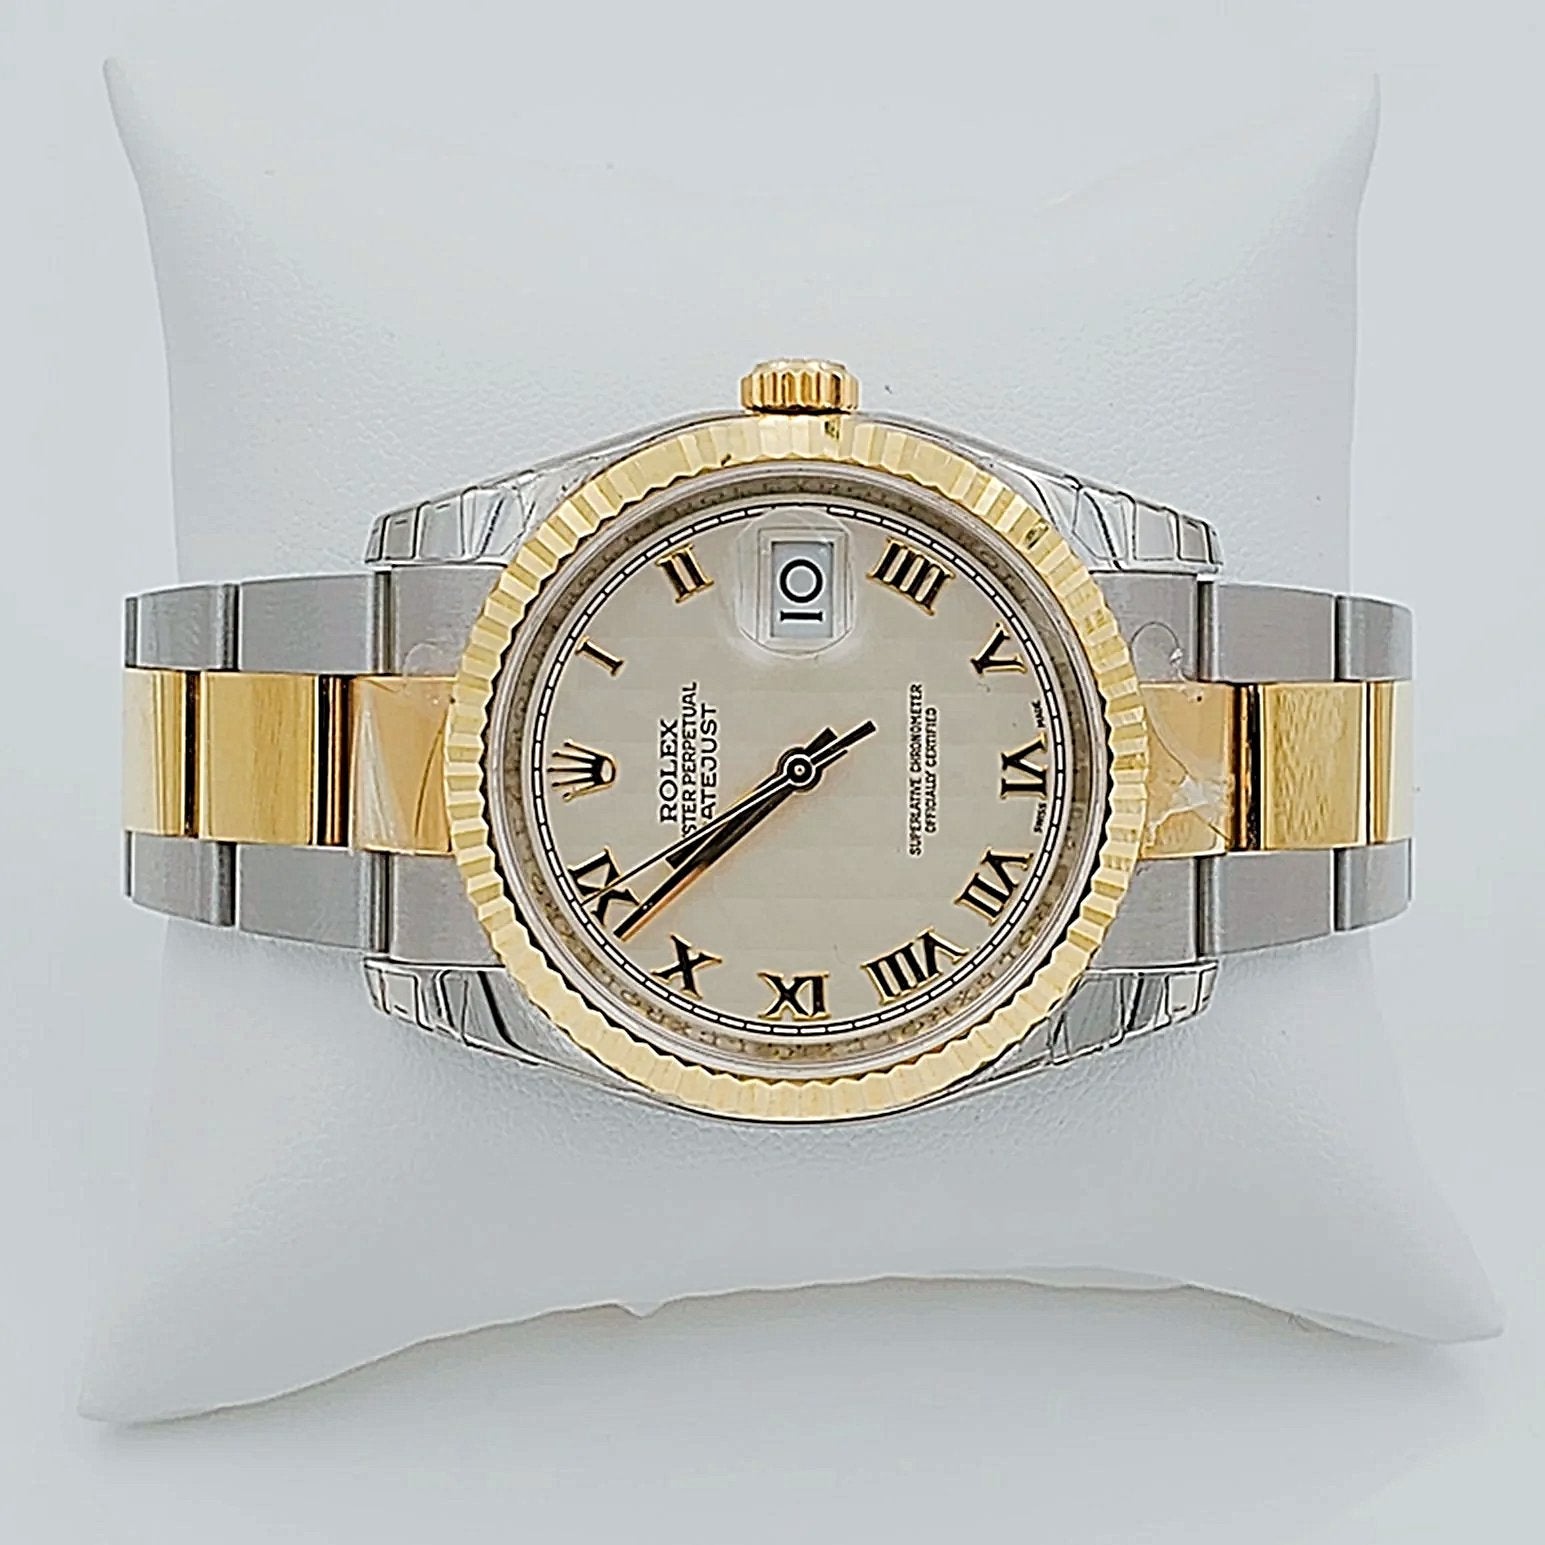 *Men's Rolex DateJust 36mm Oyster Perpetual Two Tone 18K Gold / Stainless Steel Band Watch with Egg Shell Dial and Fluted Bezel. (UNWORN 116203)